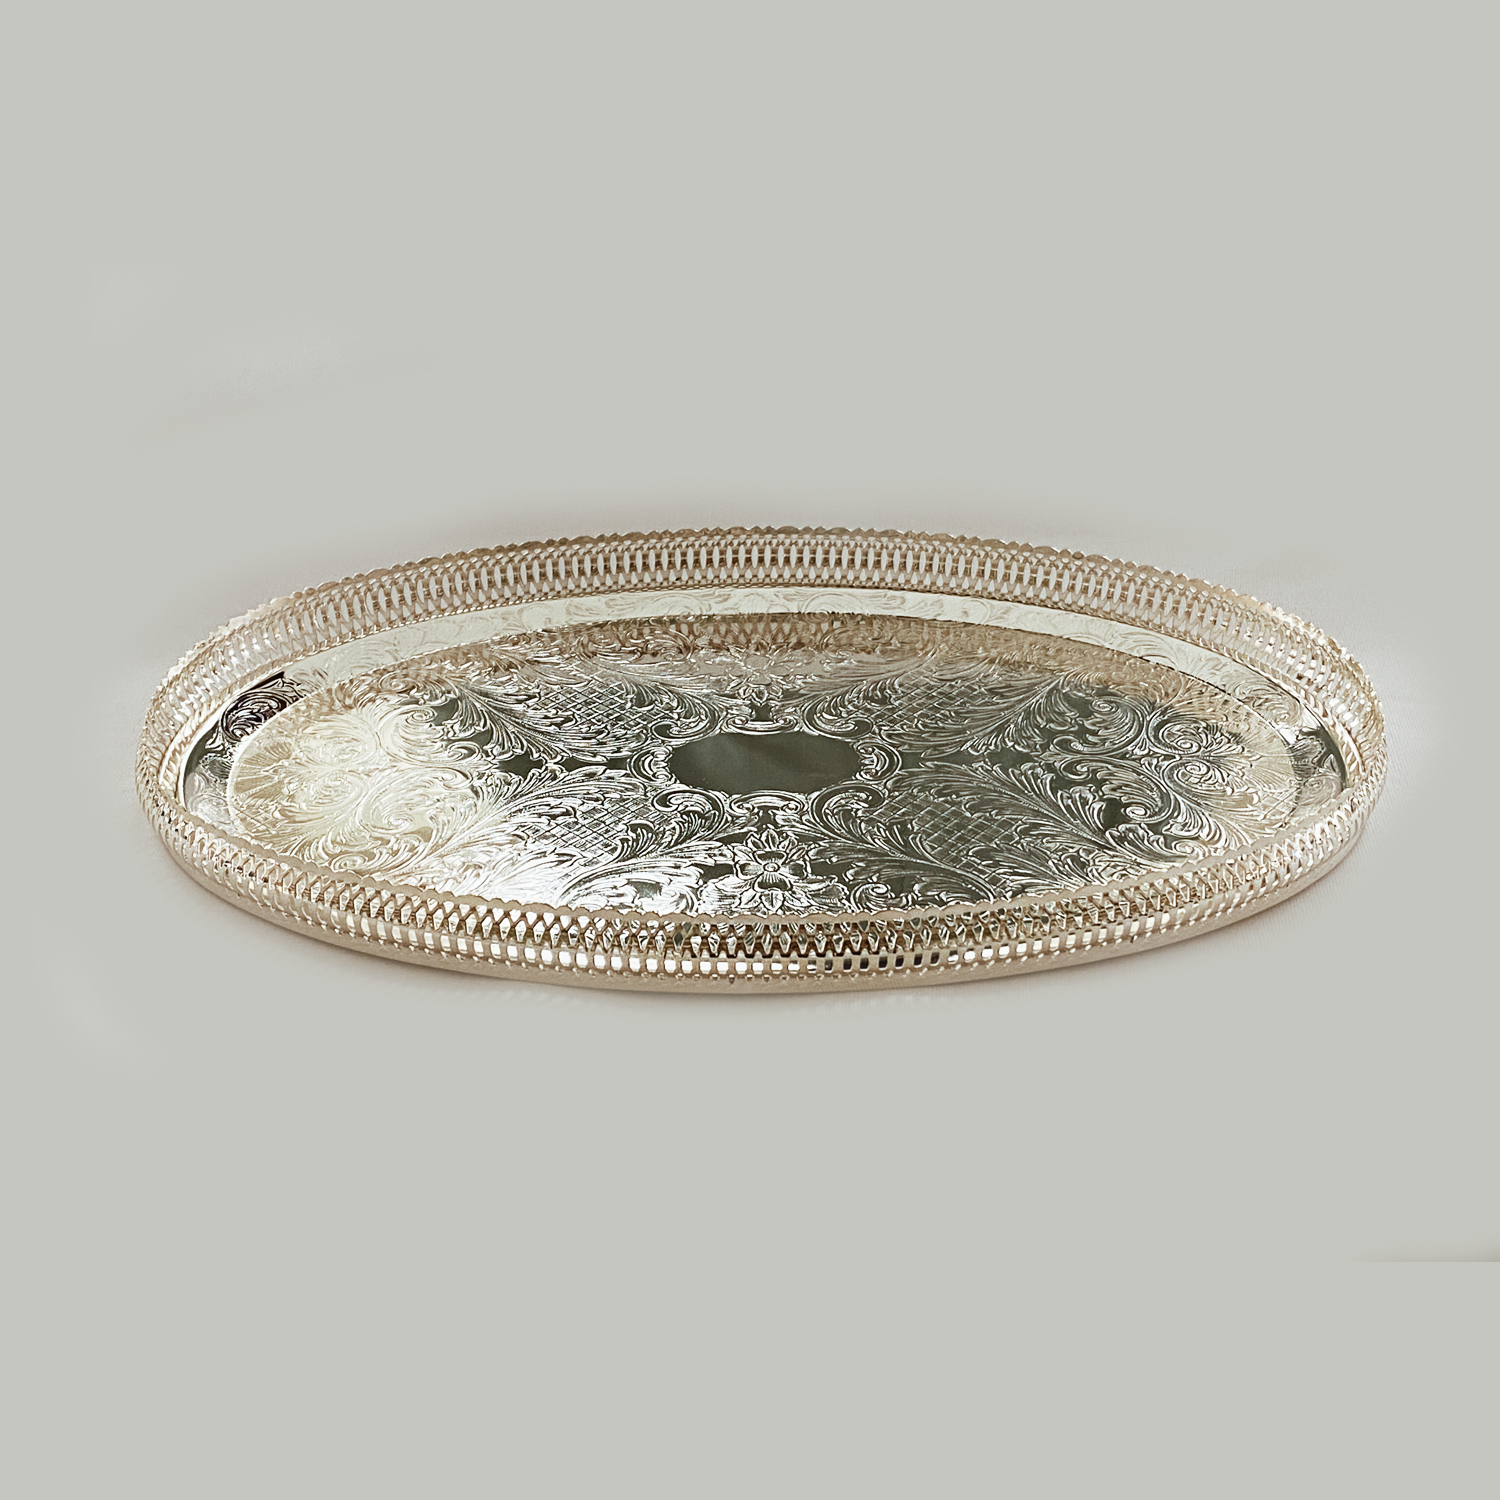 Silver Plated Oval Gallery Tray | 15.5″